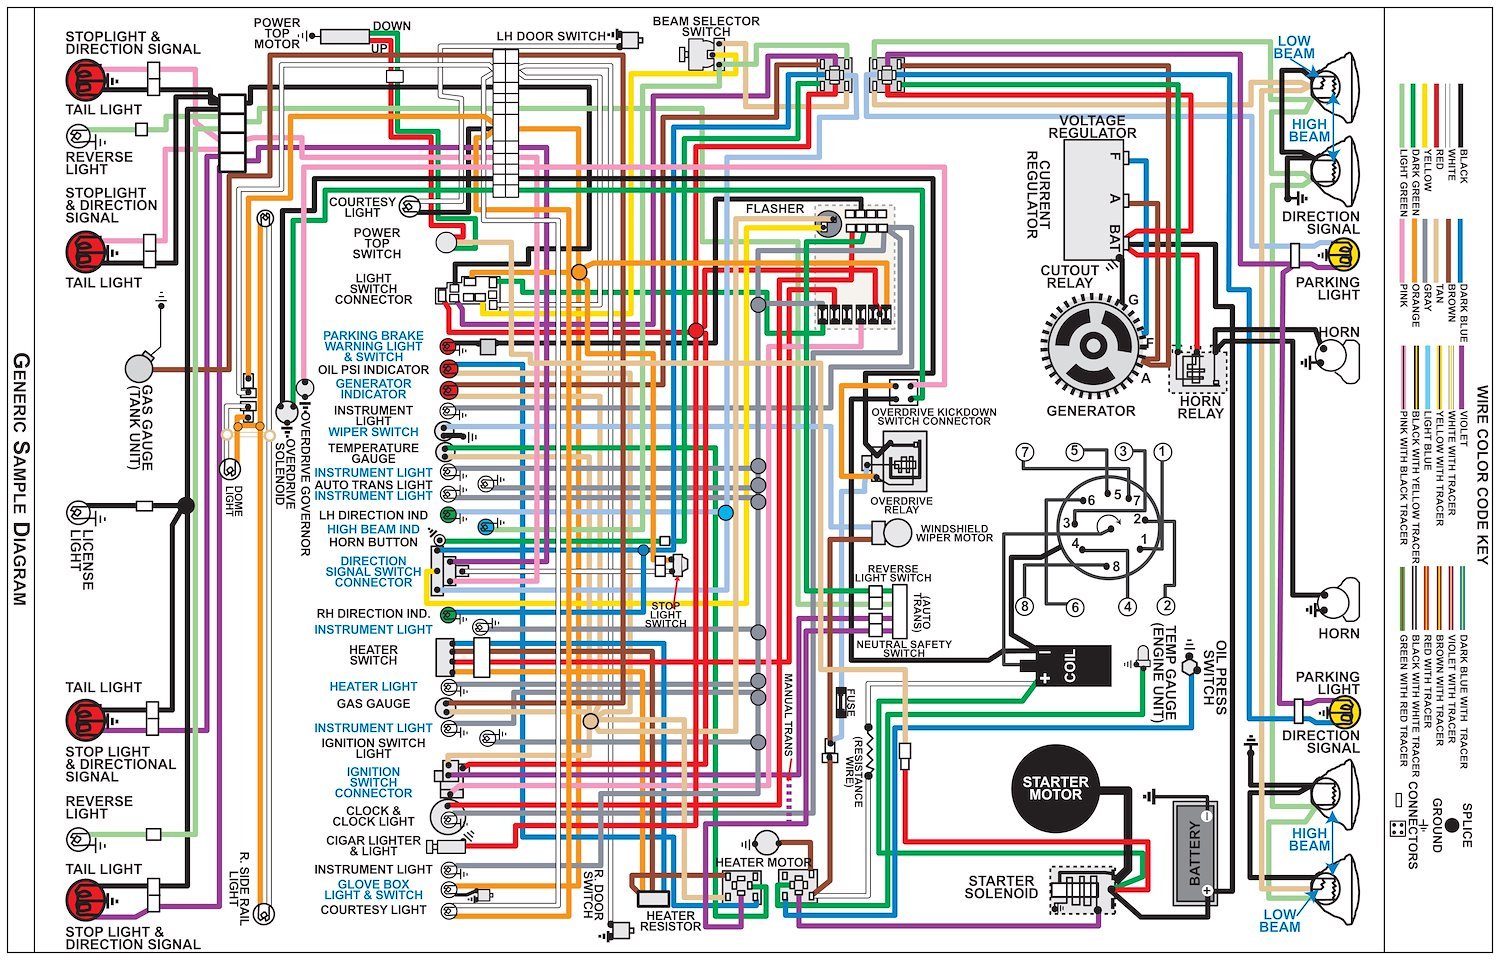 Wiring Diagram for 1970 Ford Mustang without Tachometer, 11 in x 17 in., Laminated